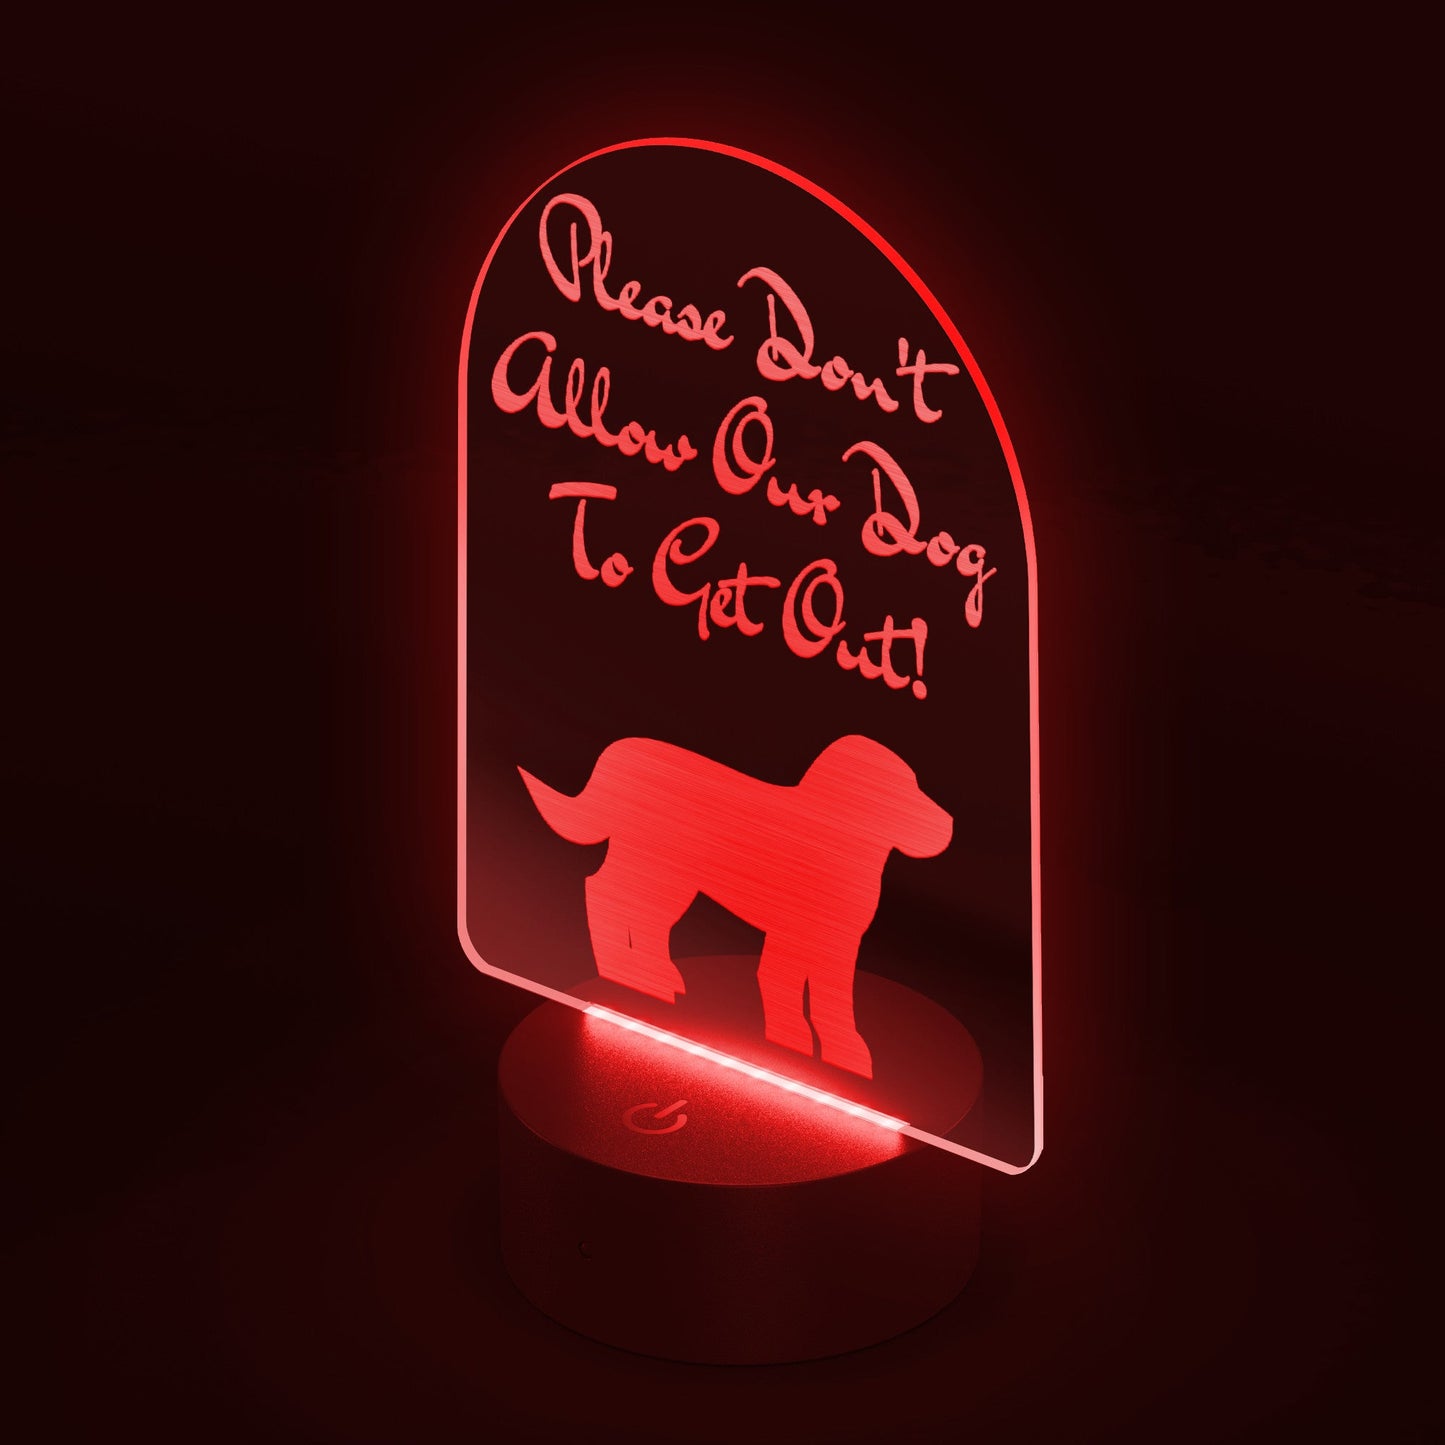 Please Don't Allow Our Dog To Get Out! Arc Acrylic LED Sign - Lizard Vigilante